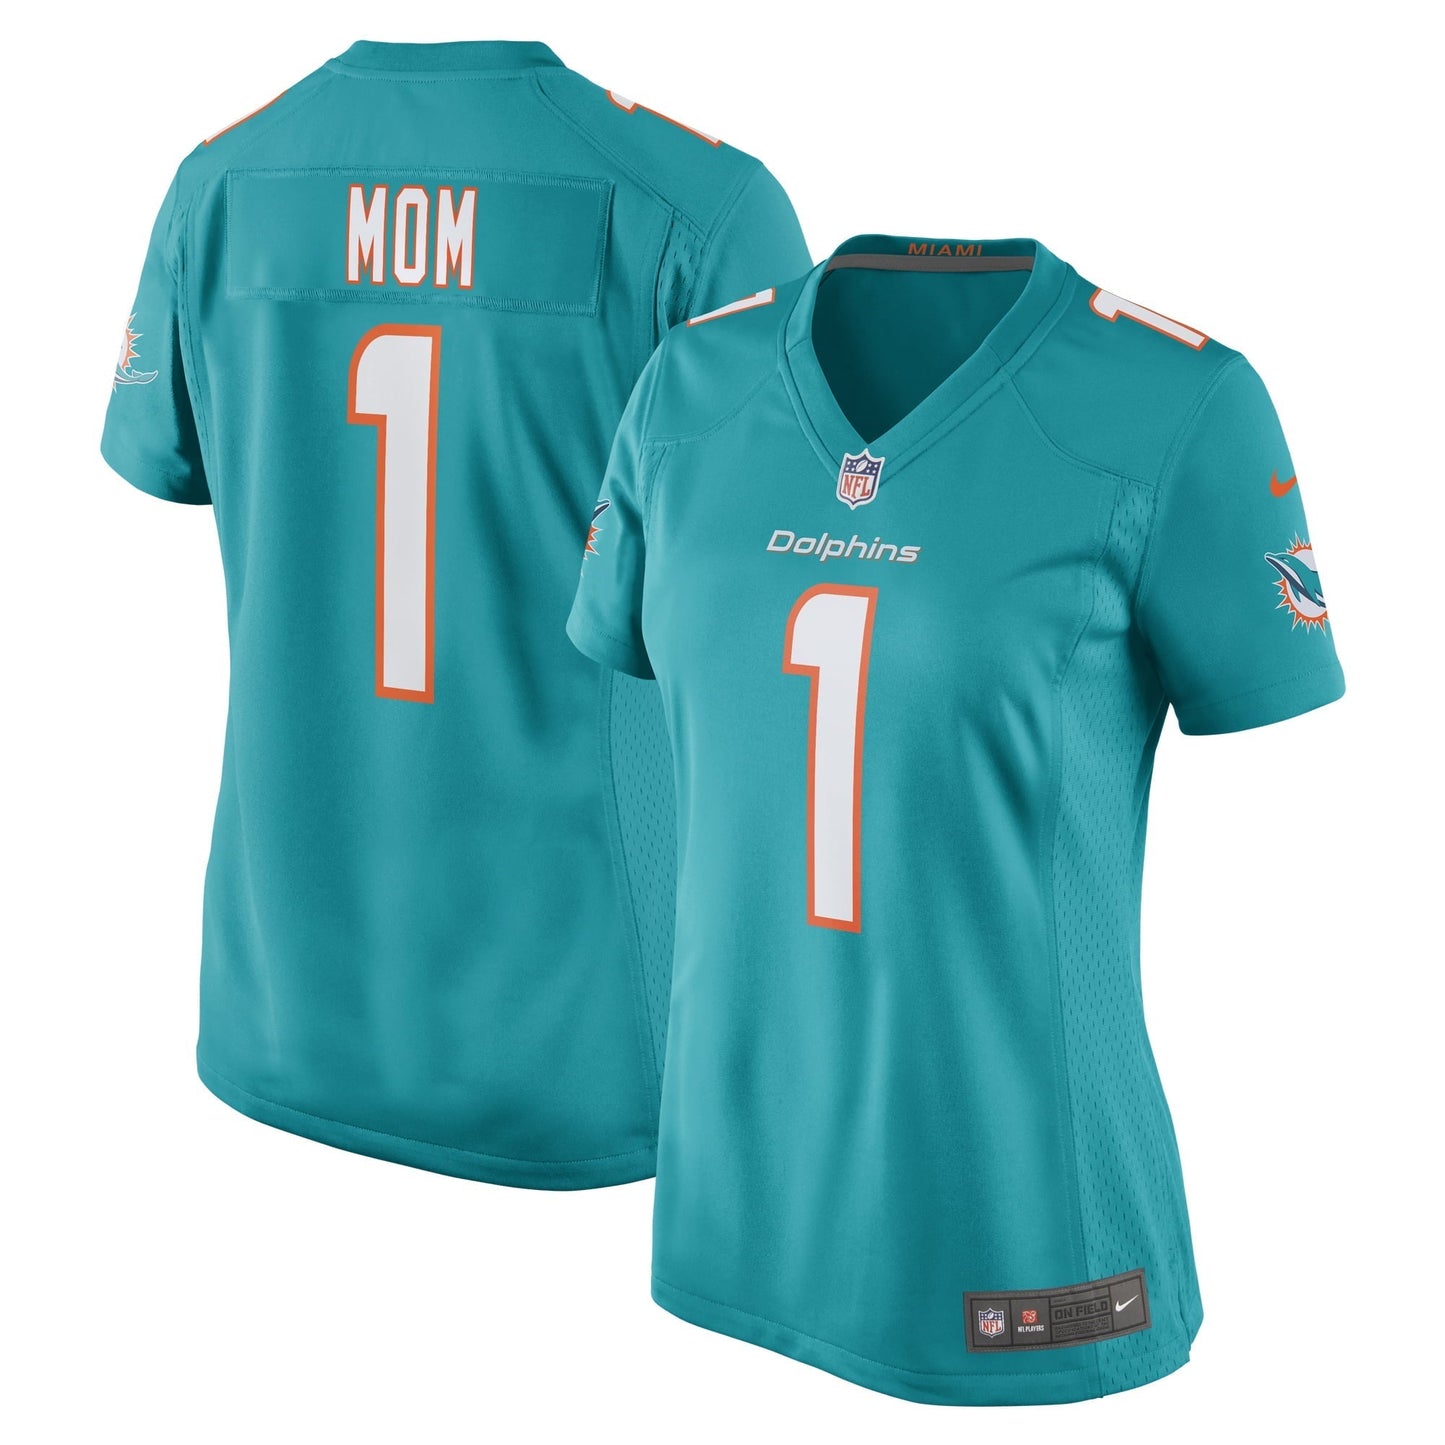 Women's Nike Number 1 Mom Aqua Miami Dolphins Game Jersey